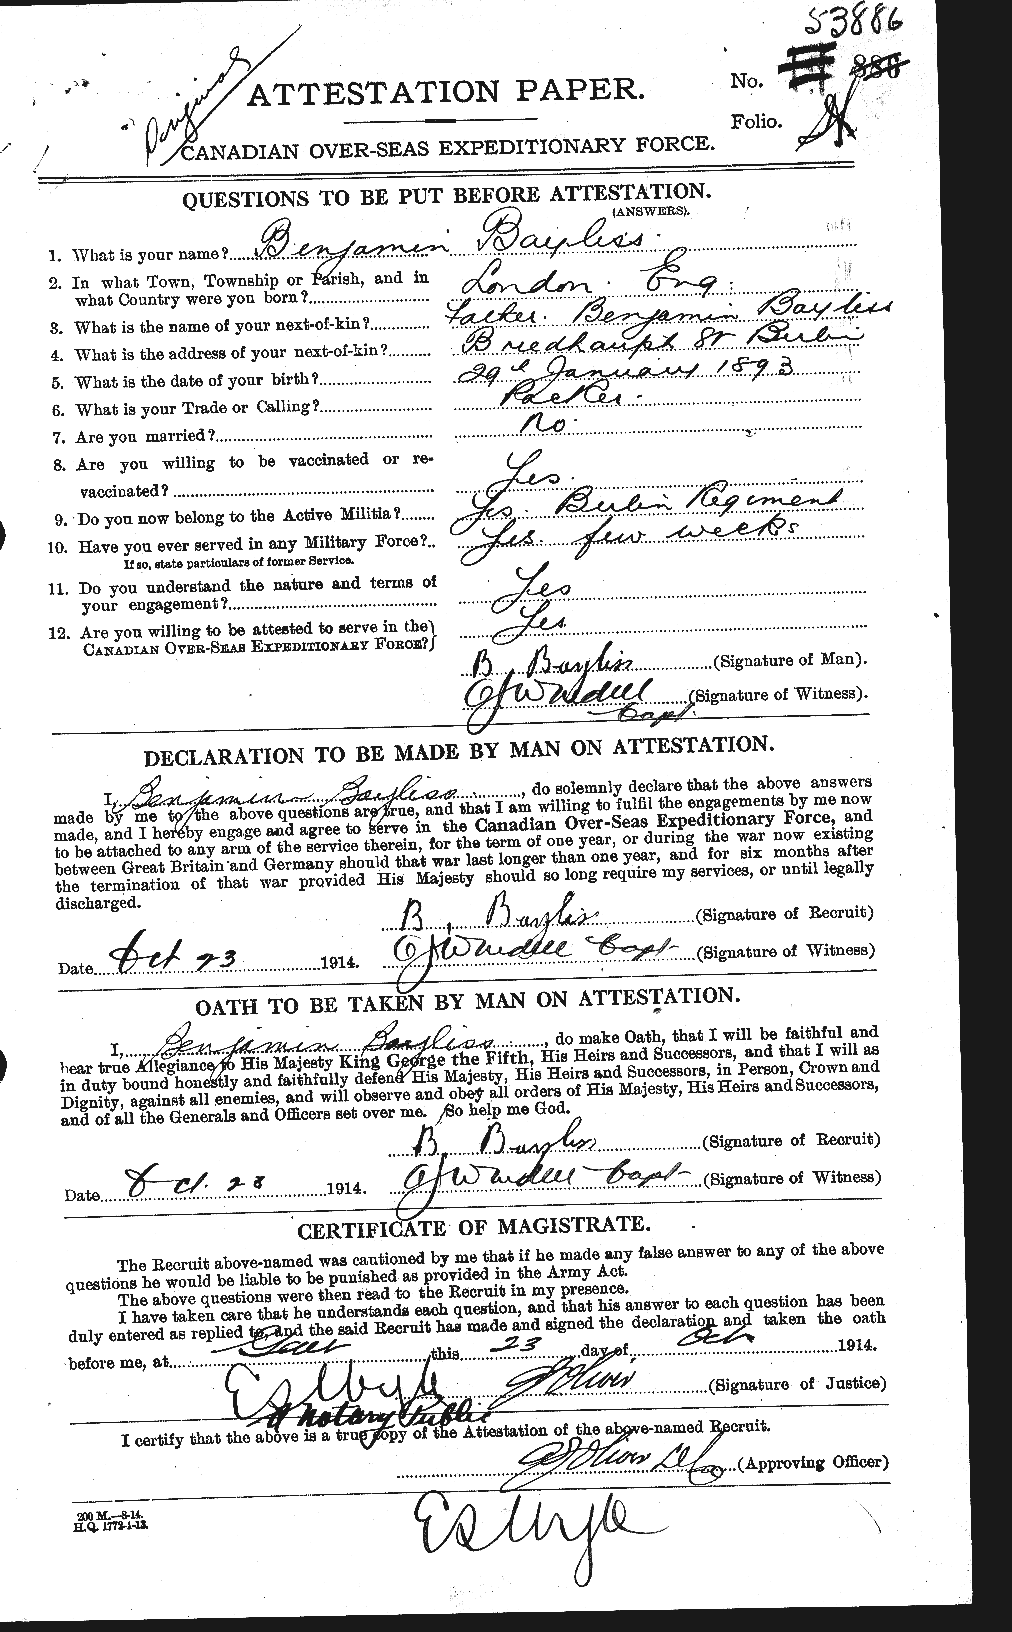 Personnel Records of the First World War - CEF 229695a